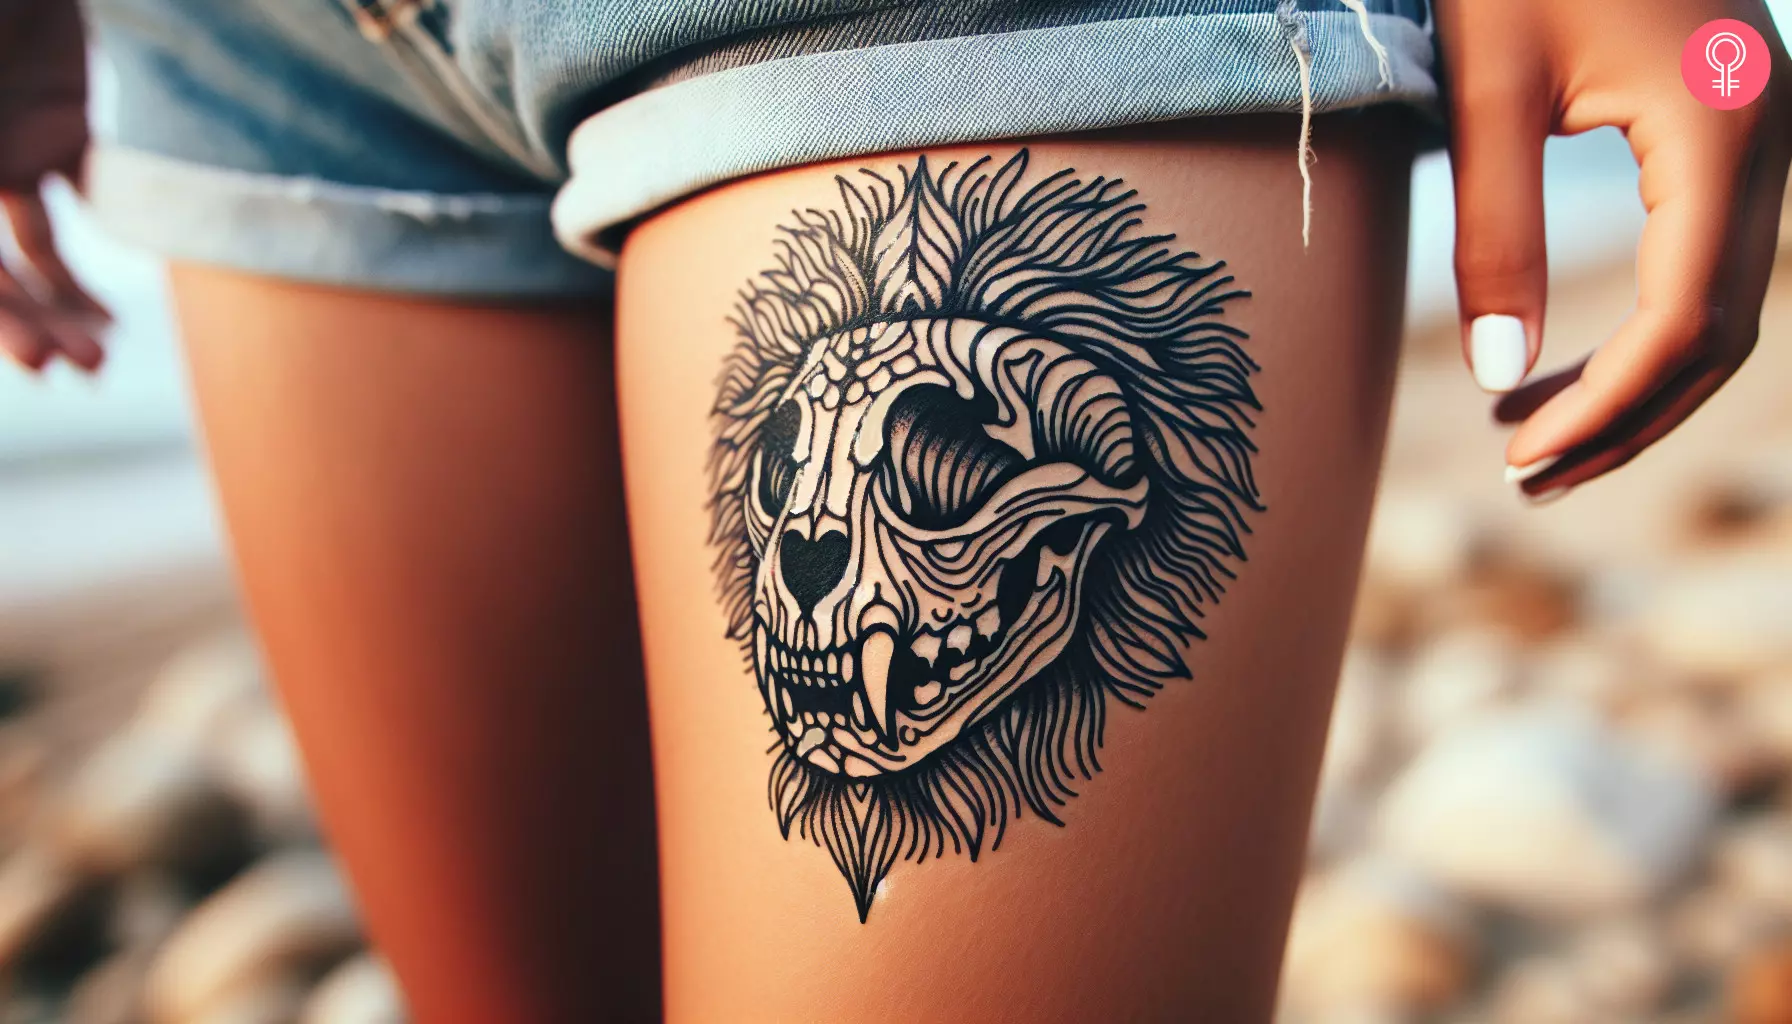 Woman with lion skull tattoo on her thigh